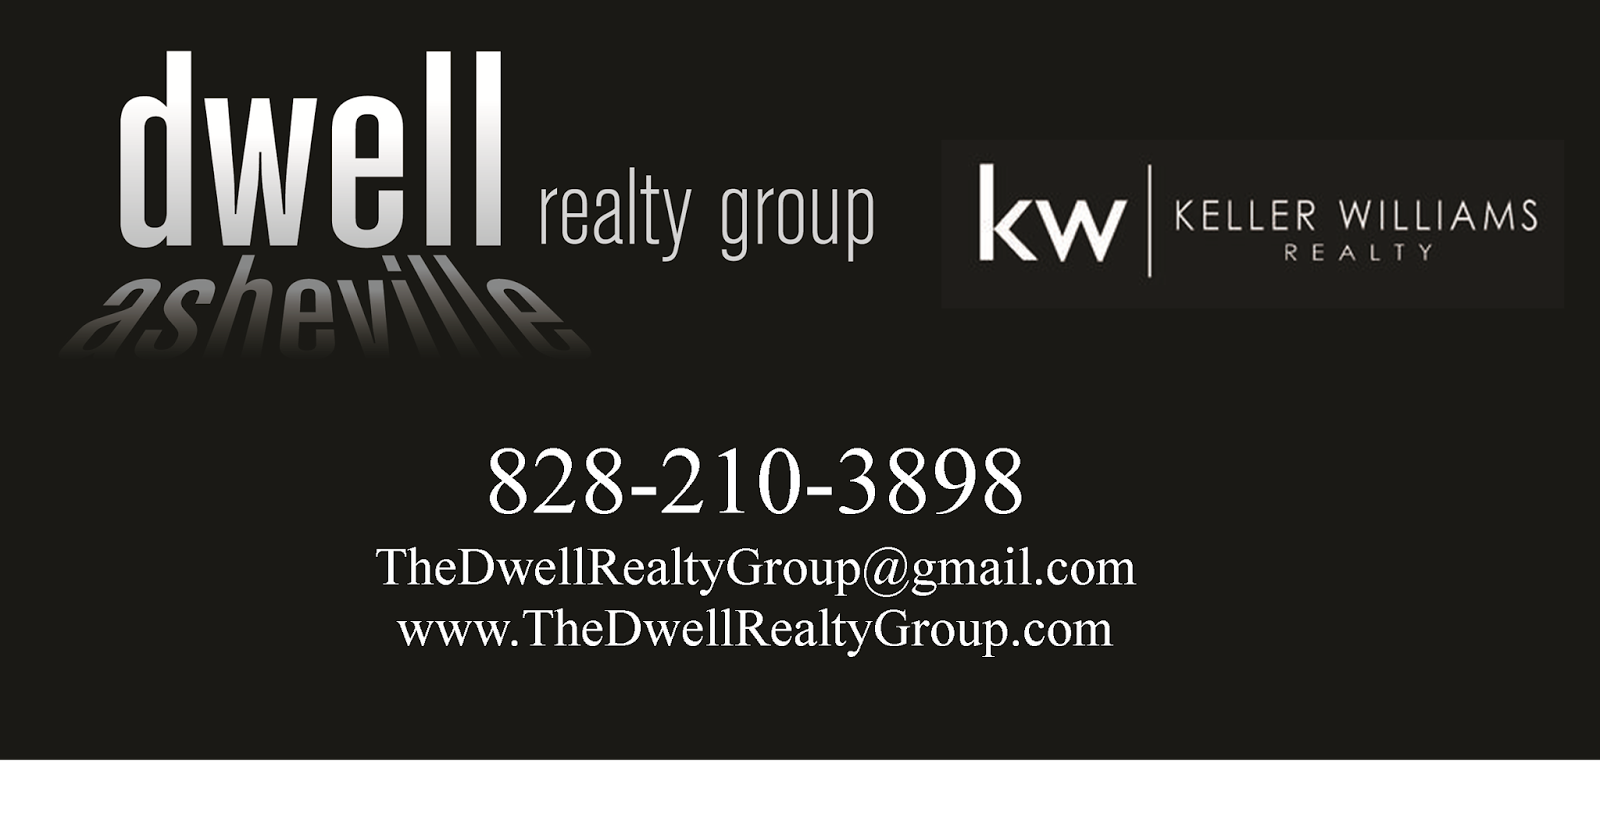 http://www.thedwellrealtygroup.com/